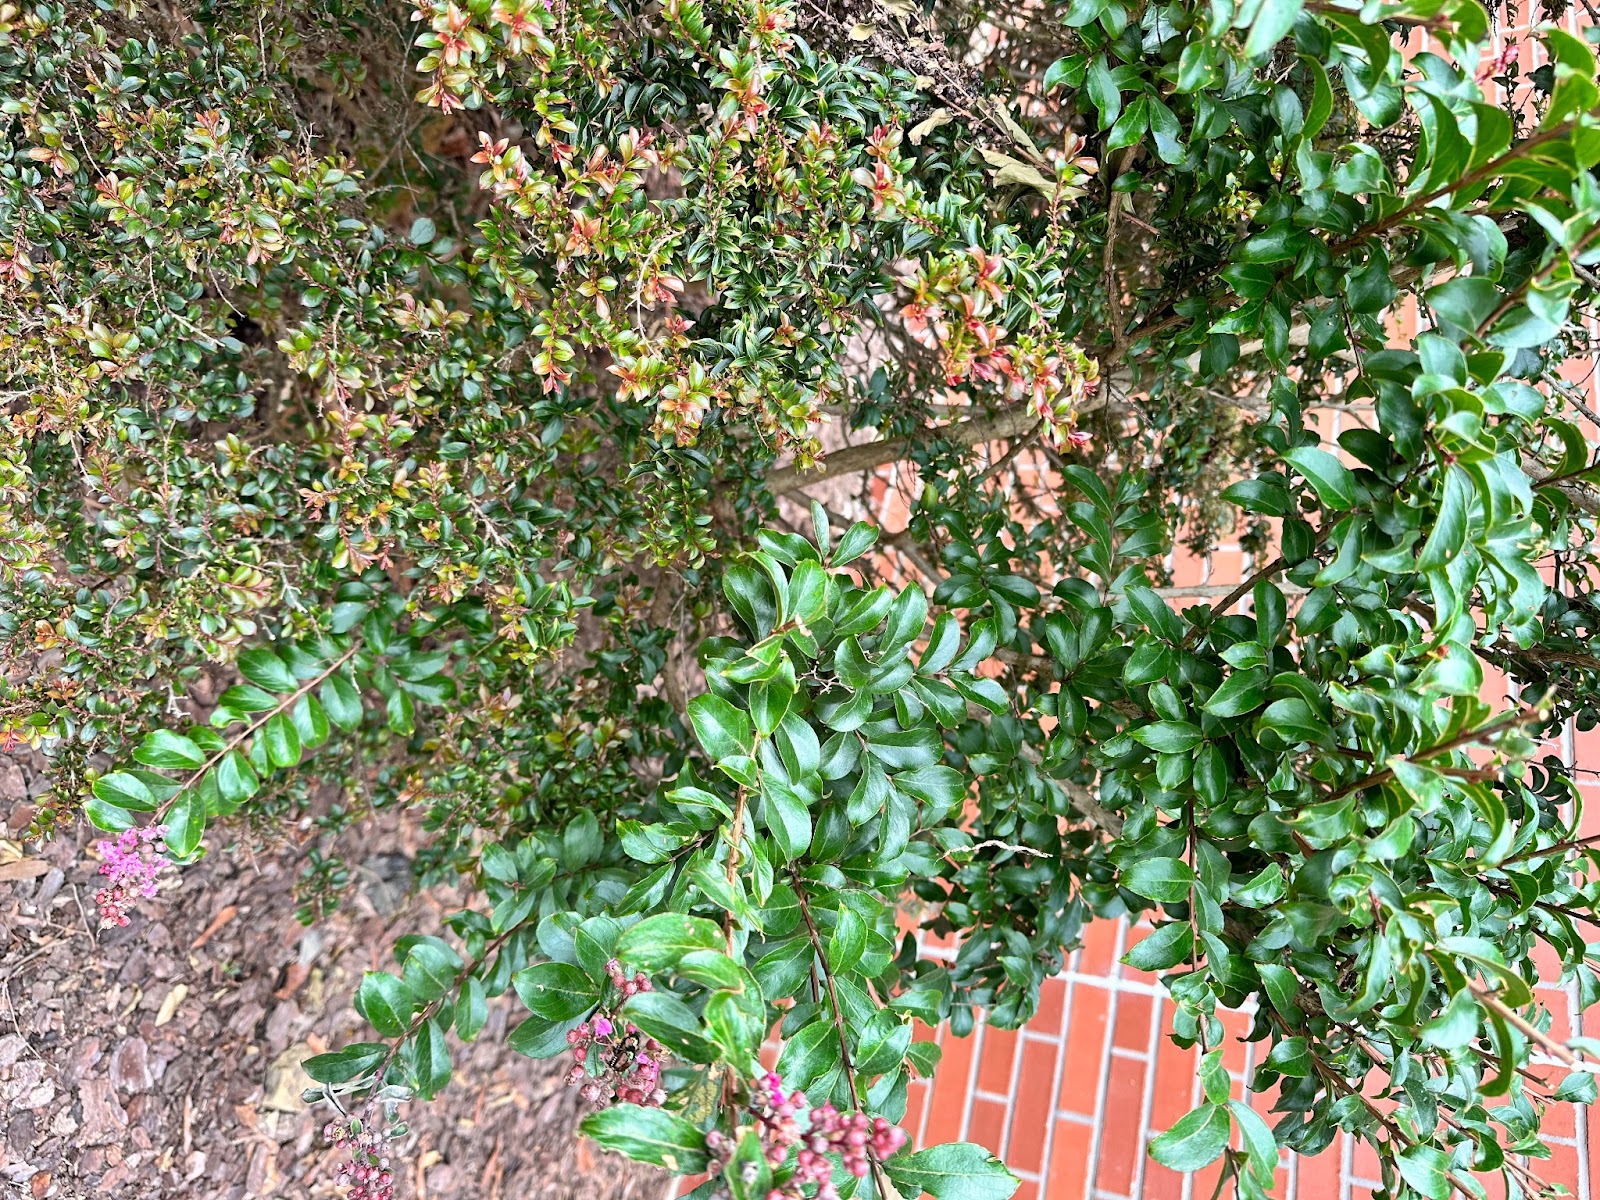 A picture of one crepe myrtle plant that is demonstrating different stages of growth.